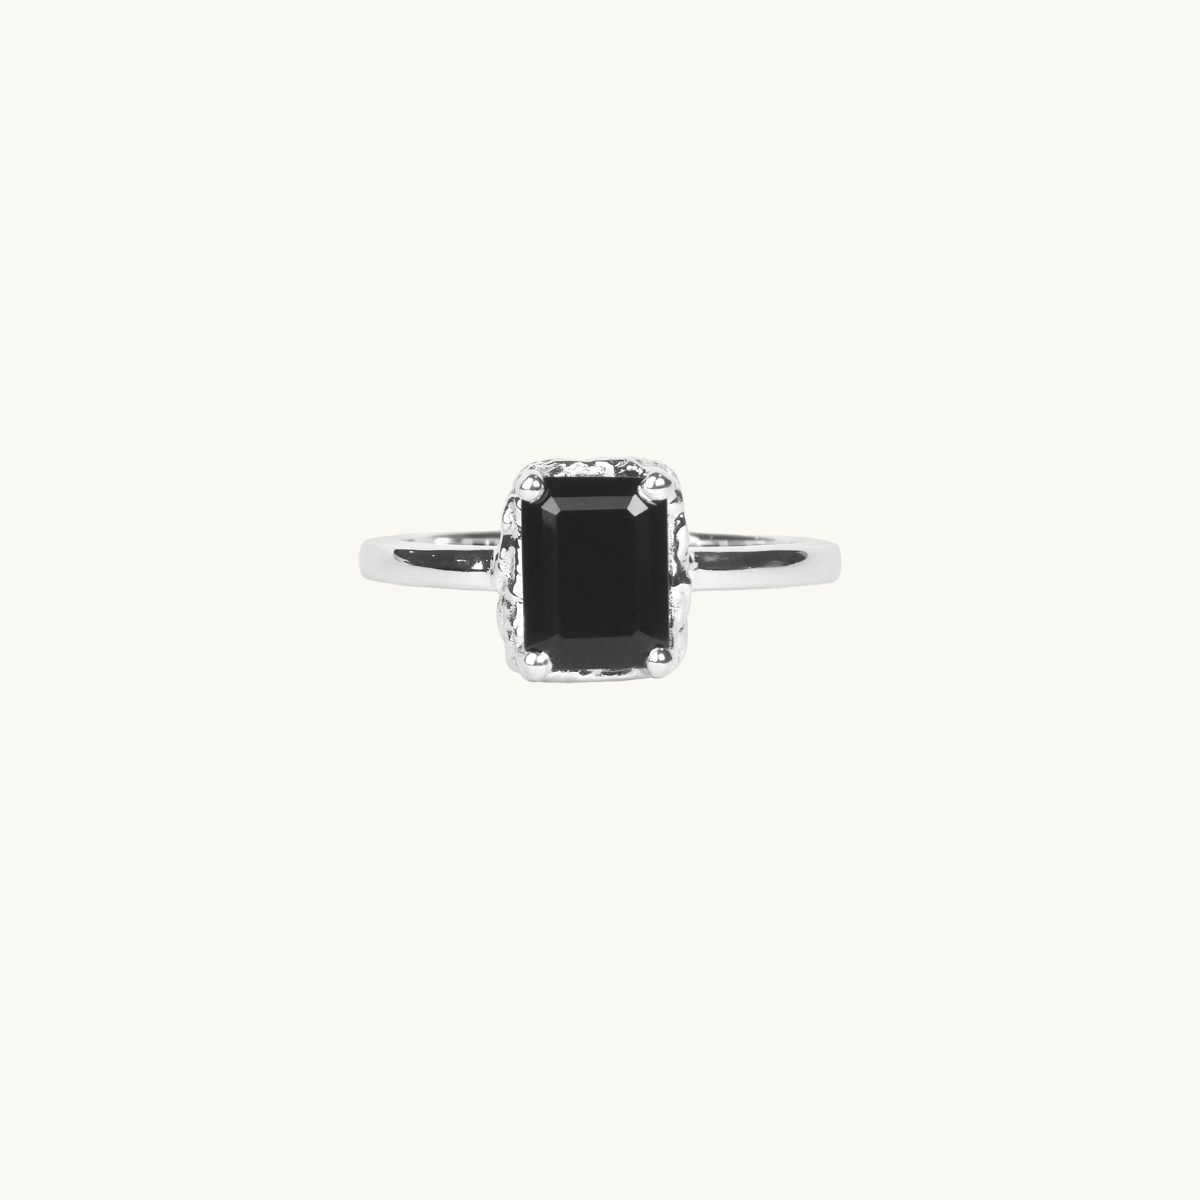 A silver ring with a rectangular black stone